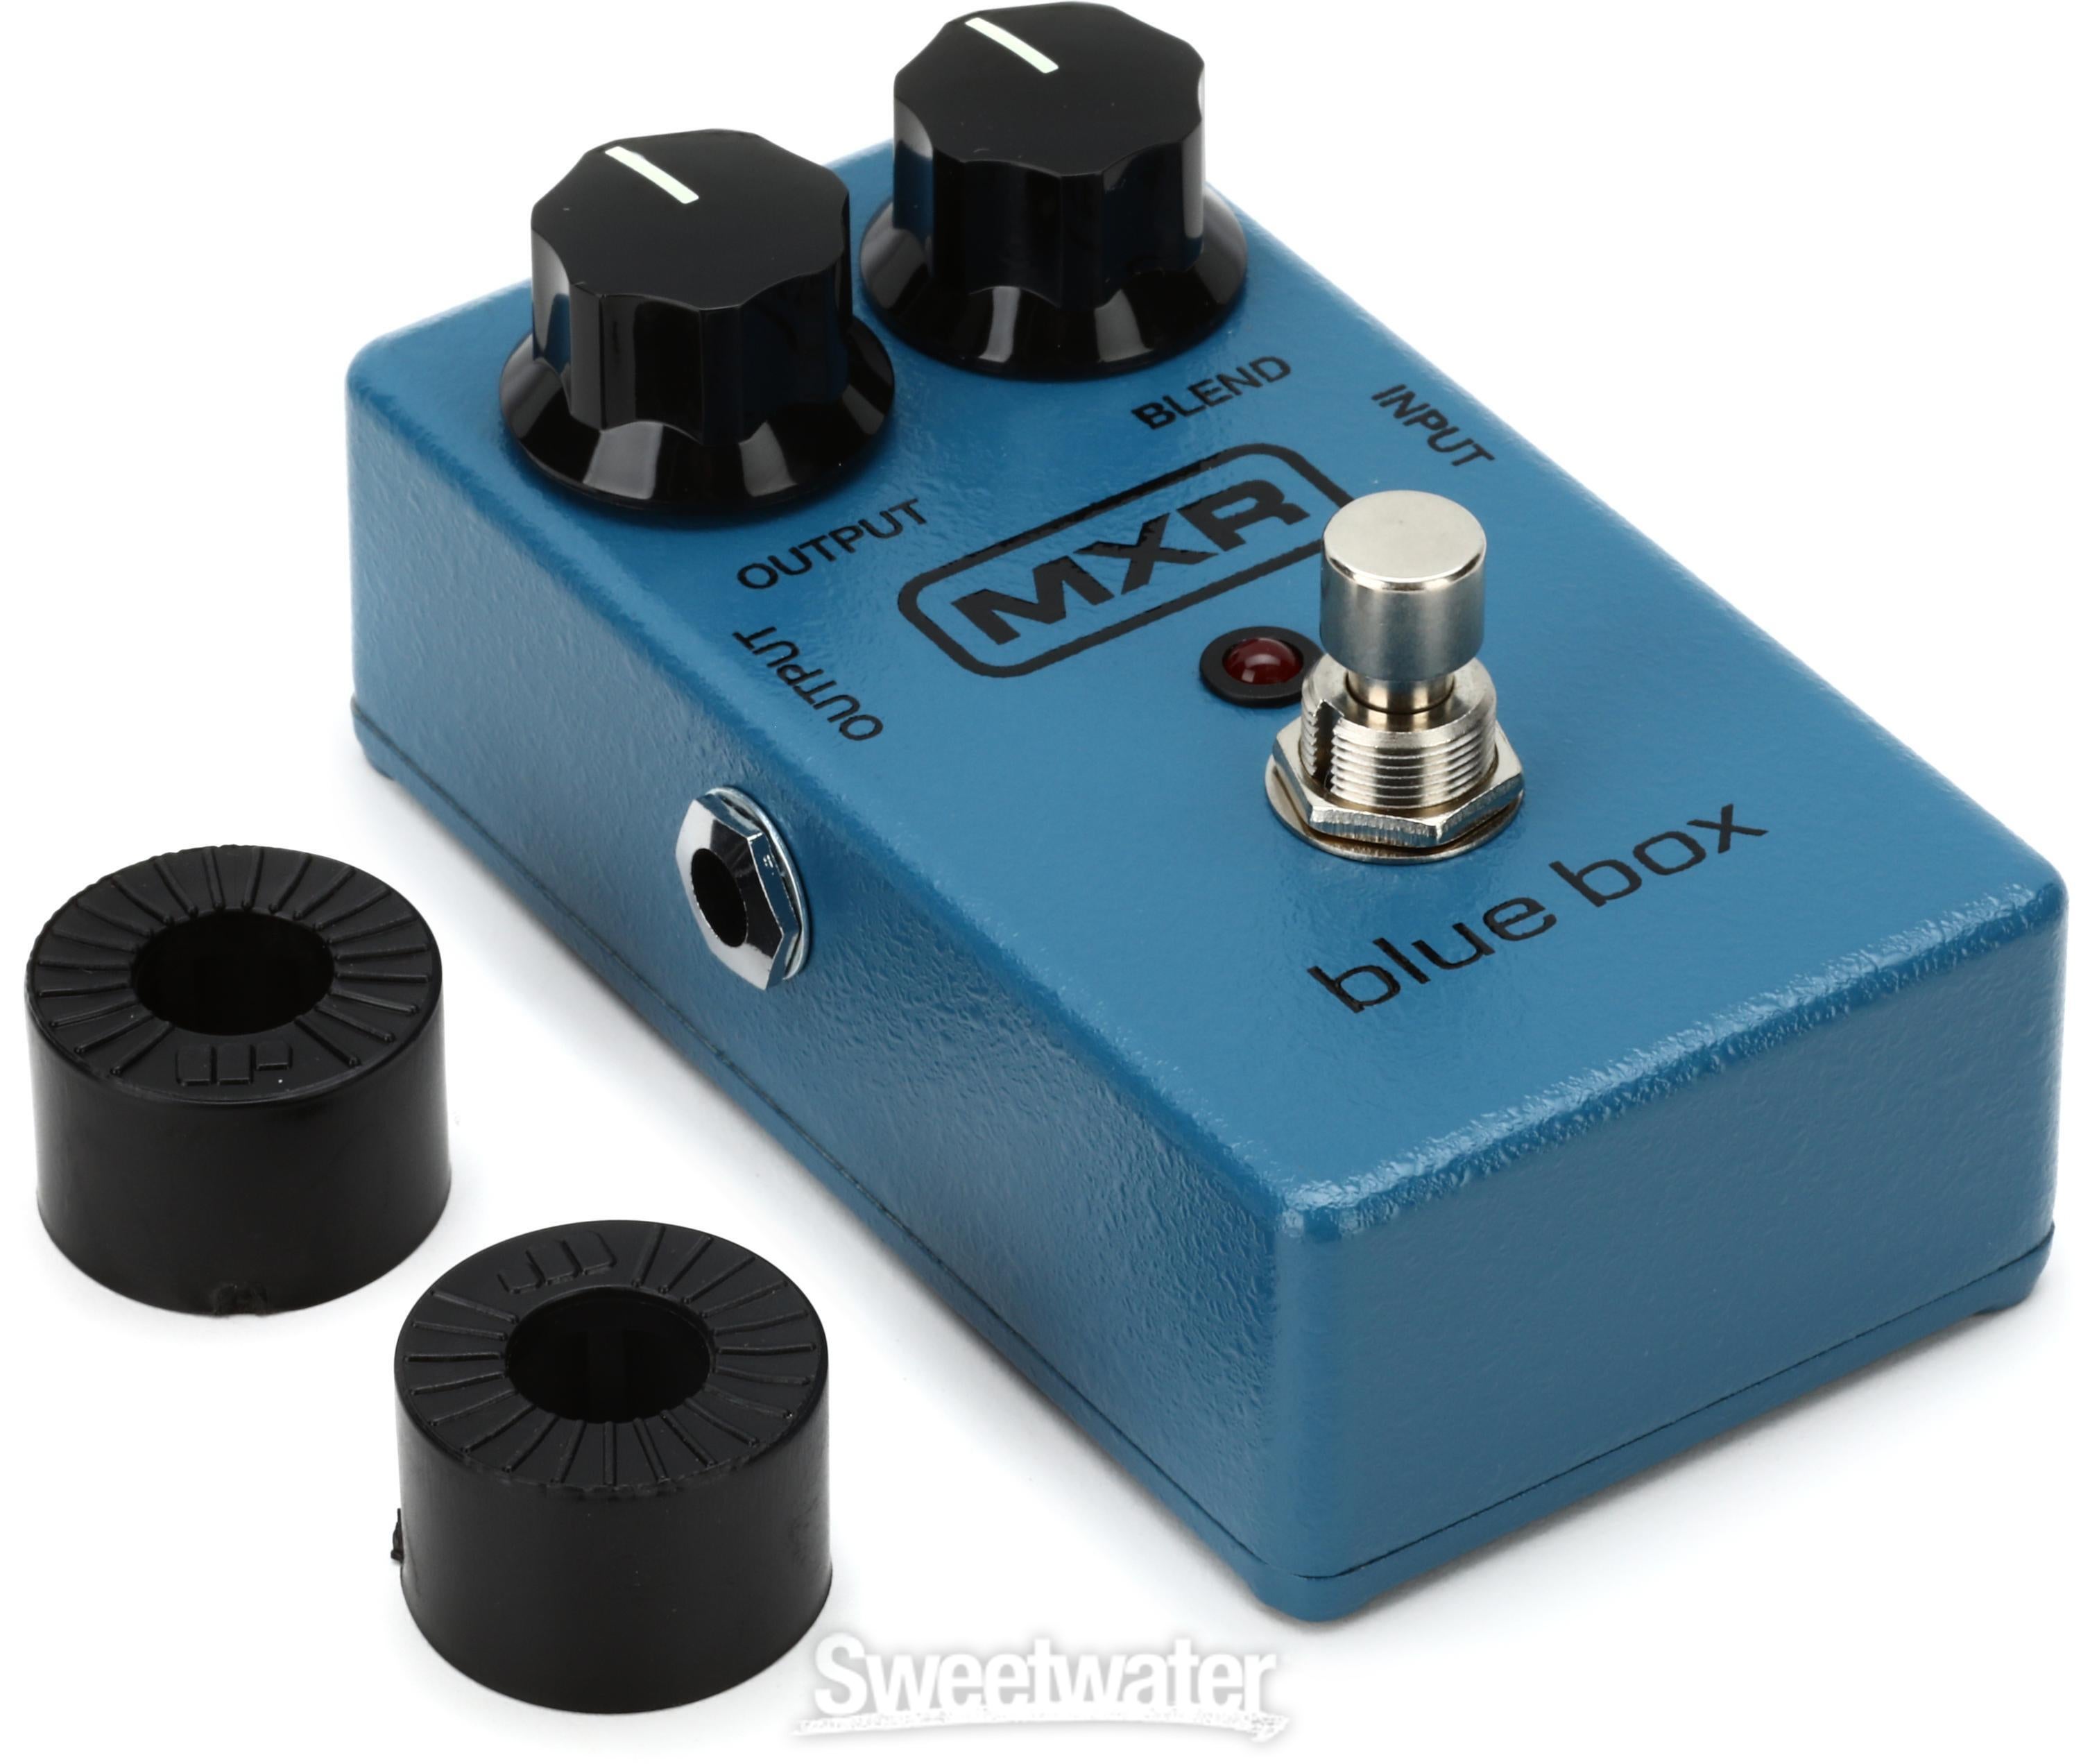 MXR M103 Blue Box Octave Pedal | Sweetwater